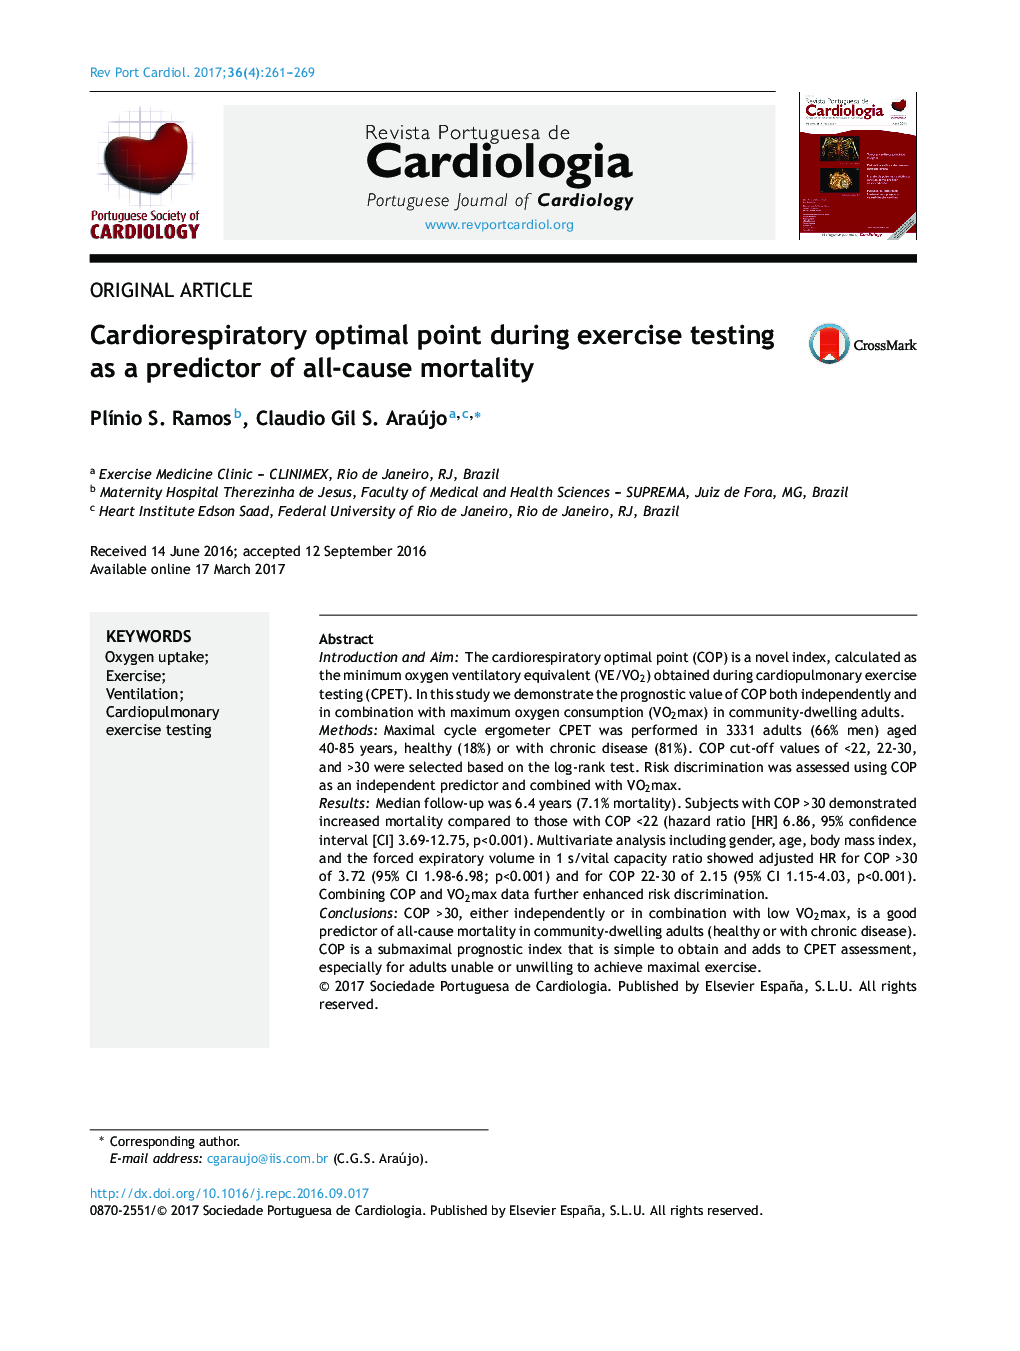 Cardiorespiratory optimal point during exercise testing as a predictor of all-cause mortality